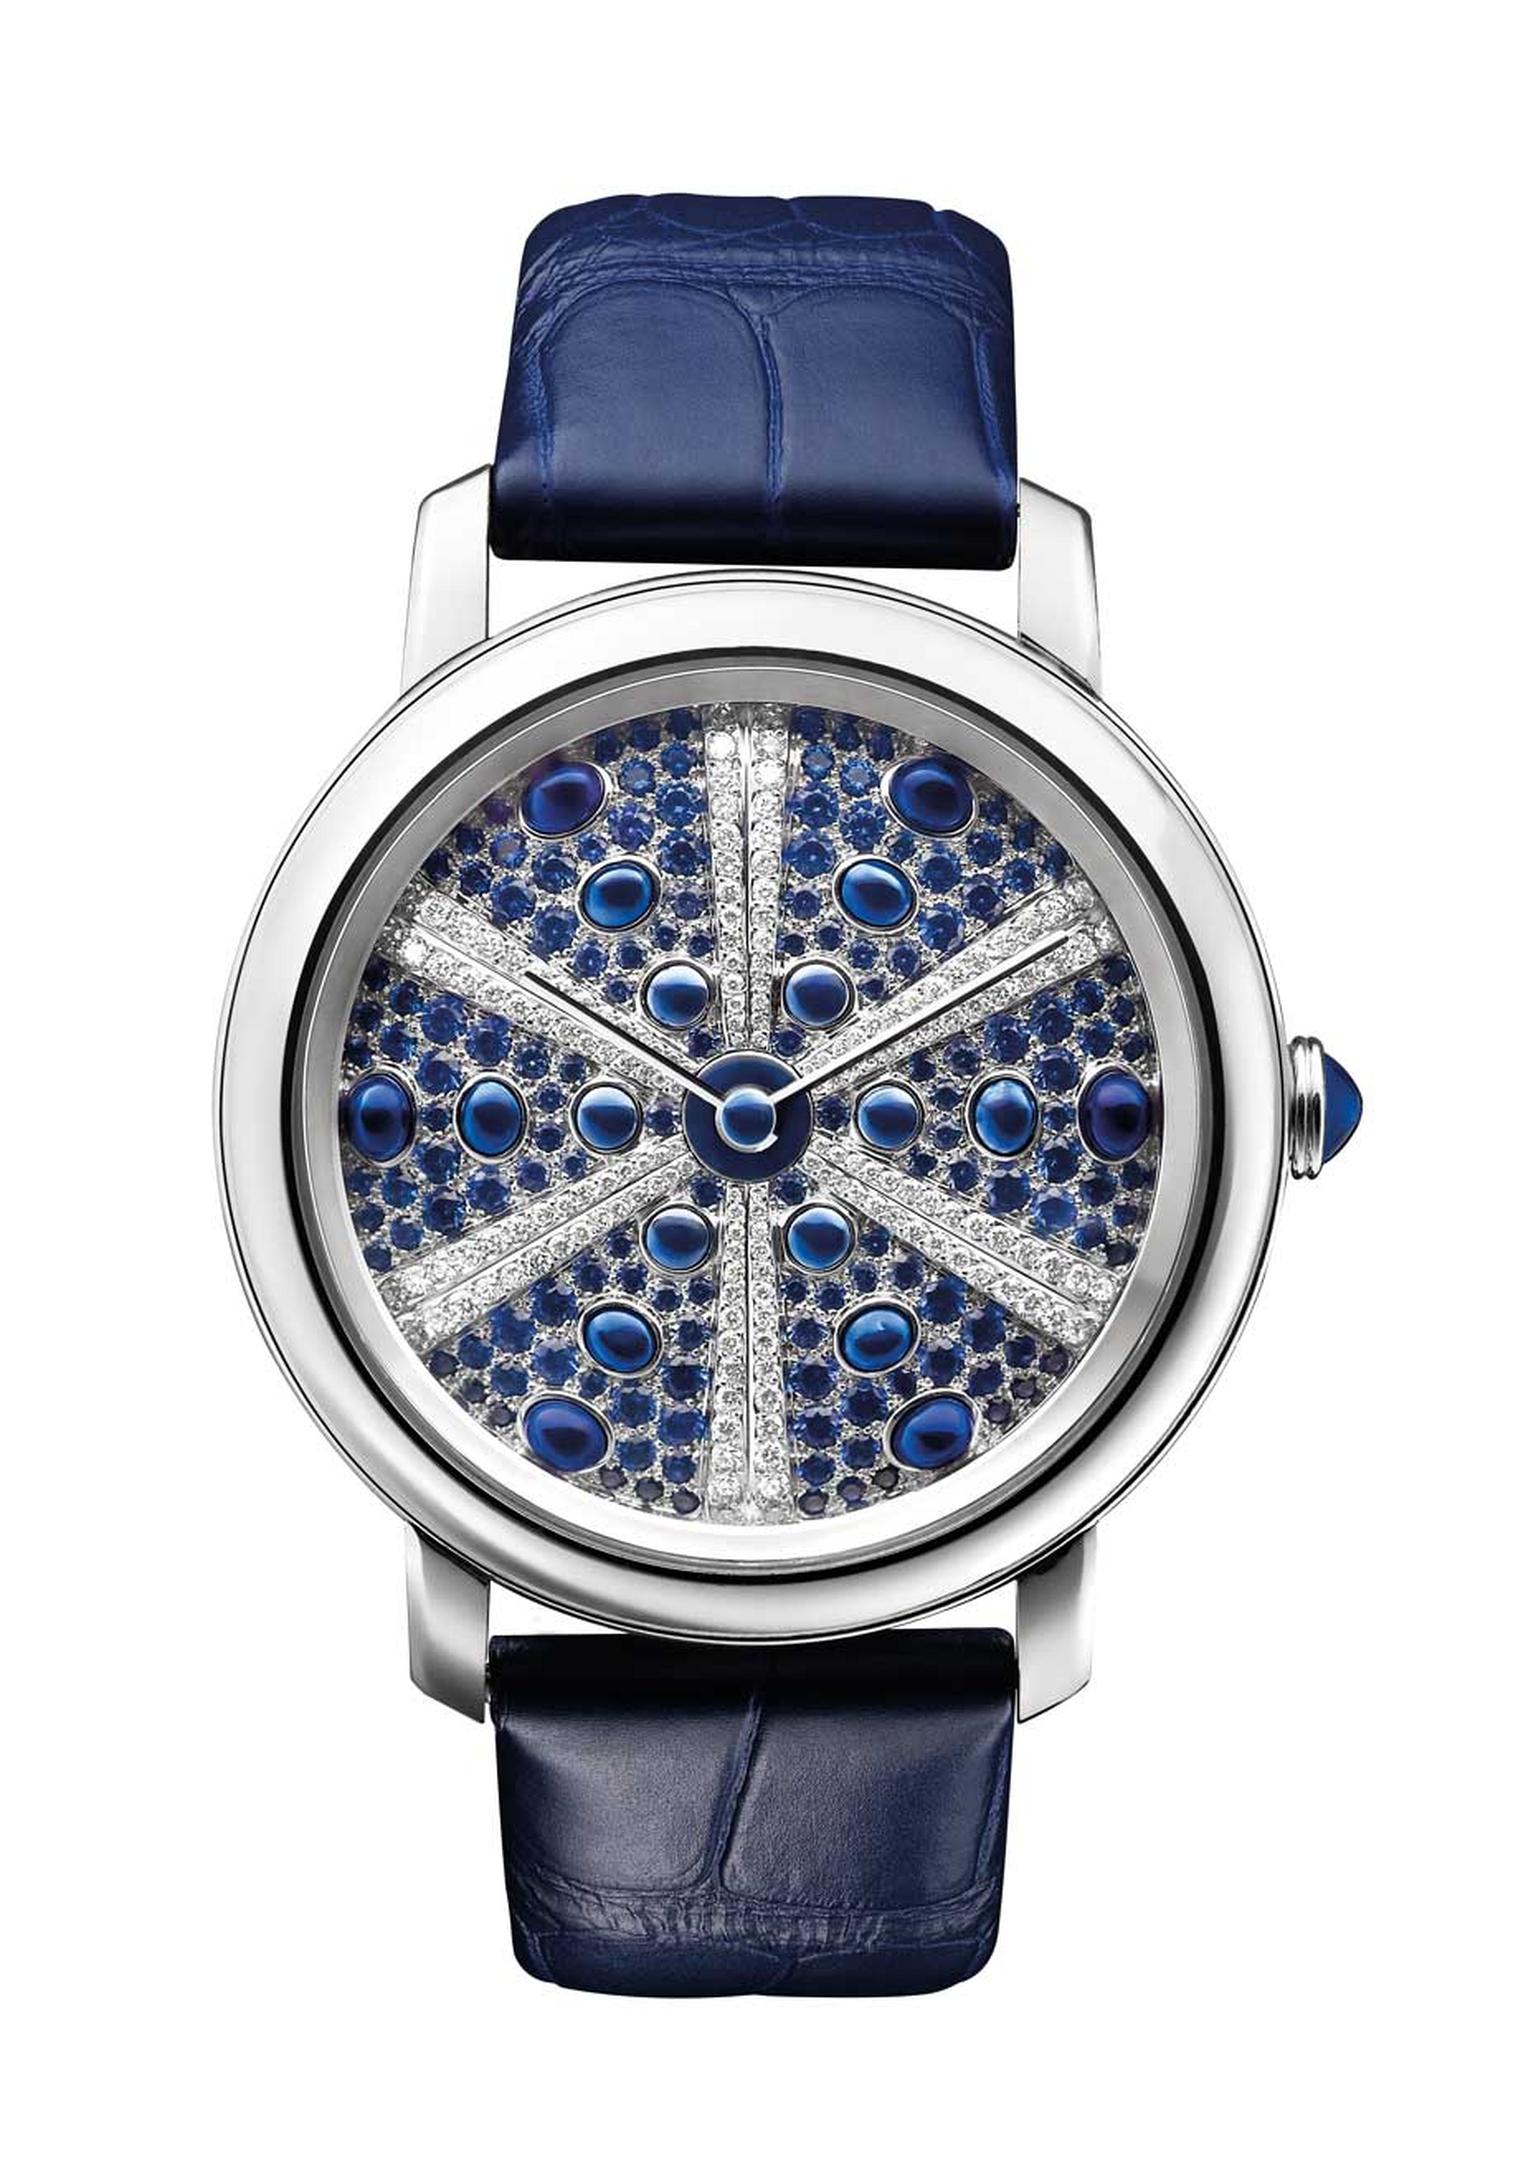 Baselworld review: my top five jewellery watches for 2014 | The ...